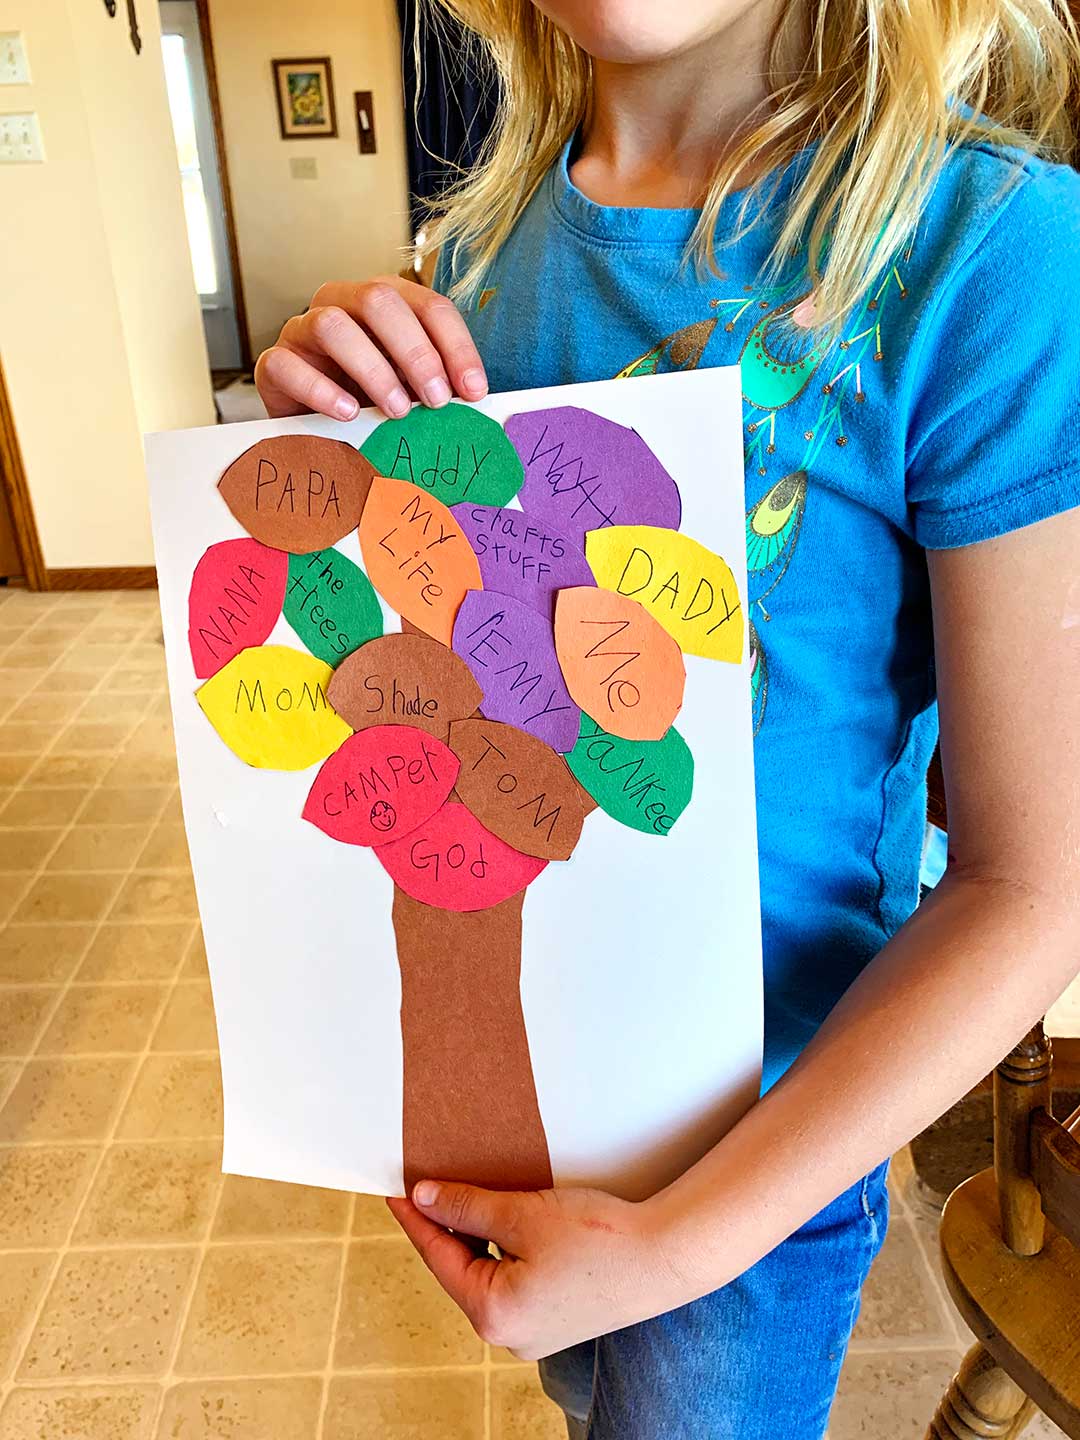 Girl with blonde hair wearing a blue t-shirt holding completed Blessing Tree craft complete with colored leaves with names written on them.